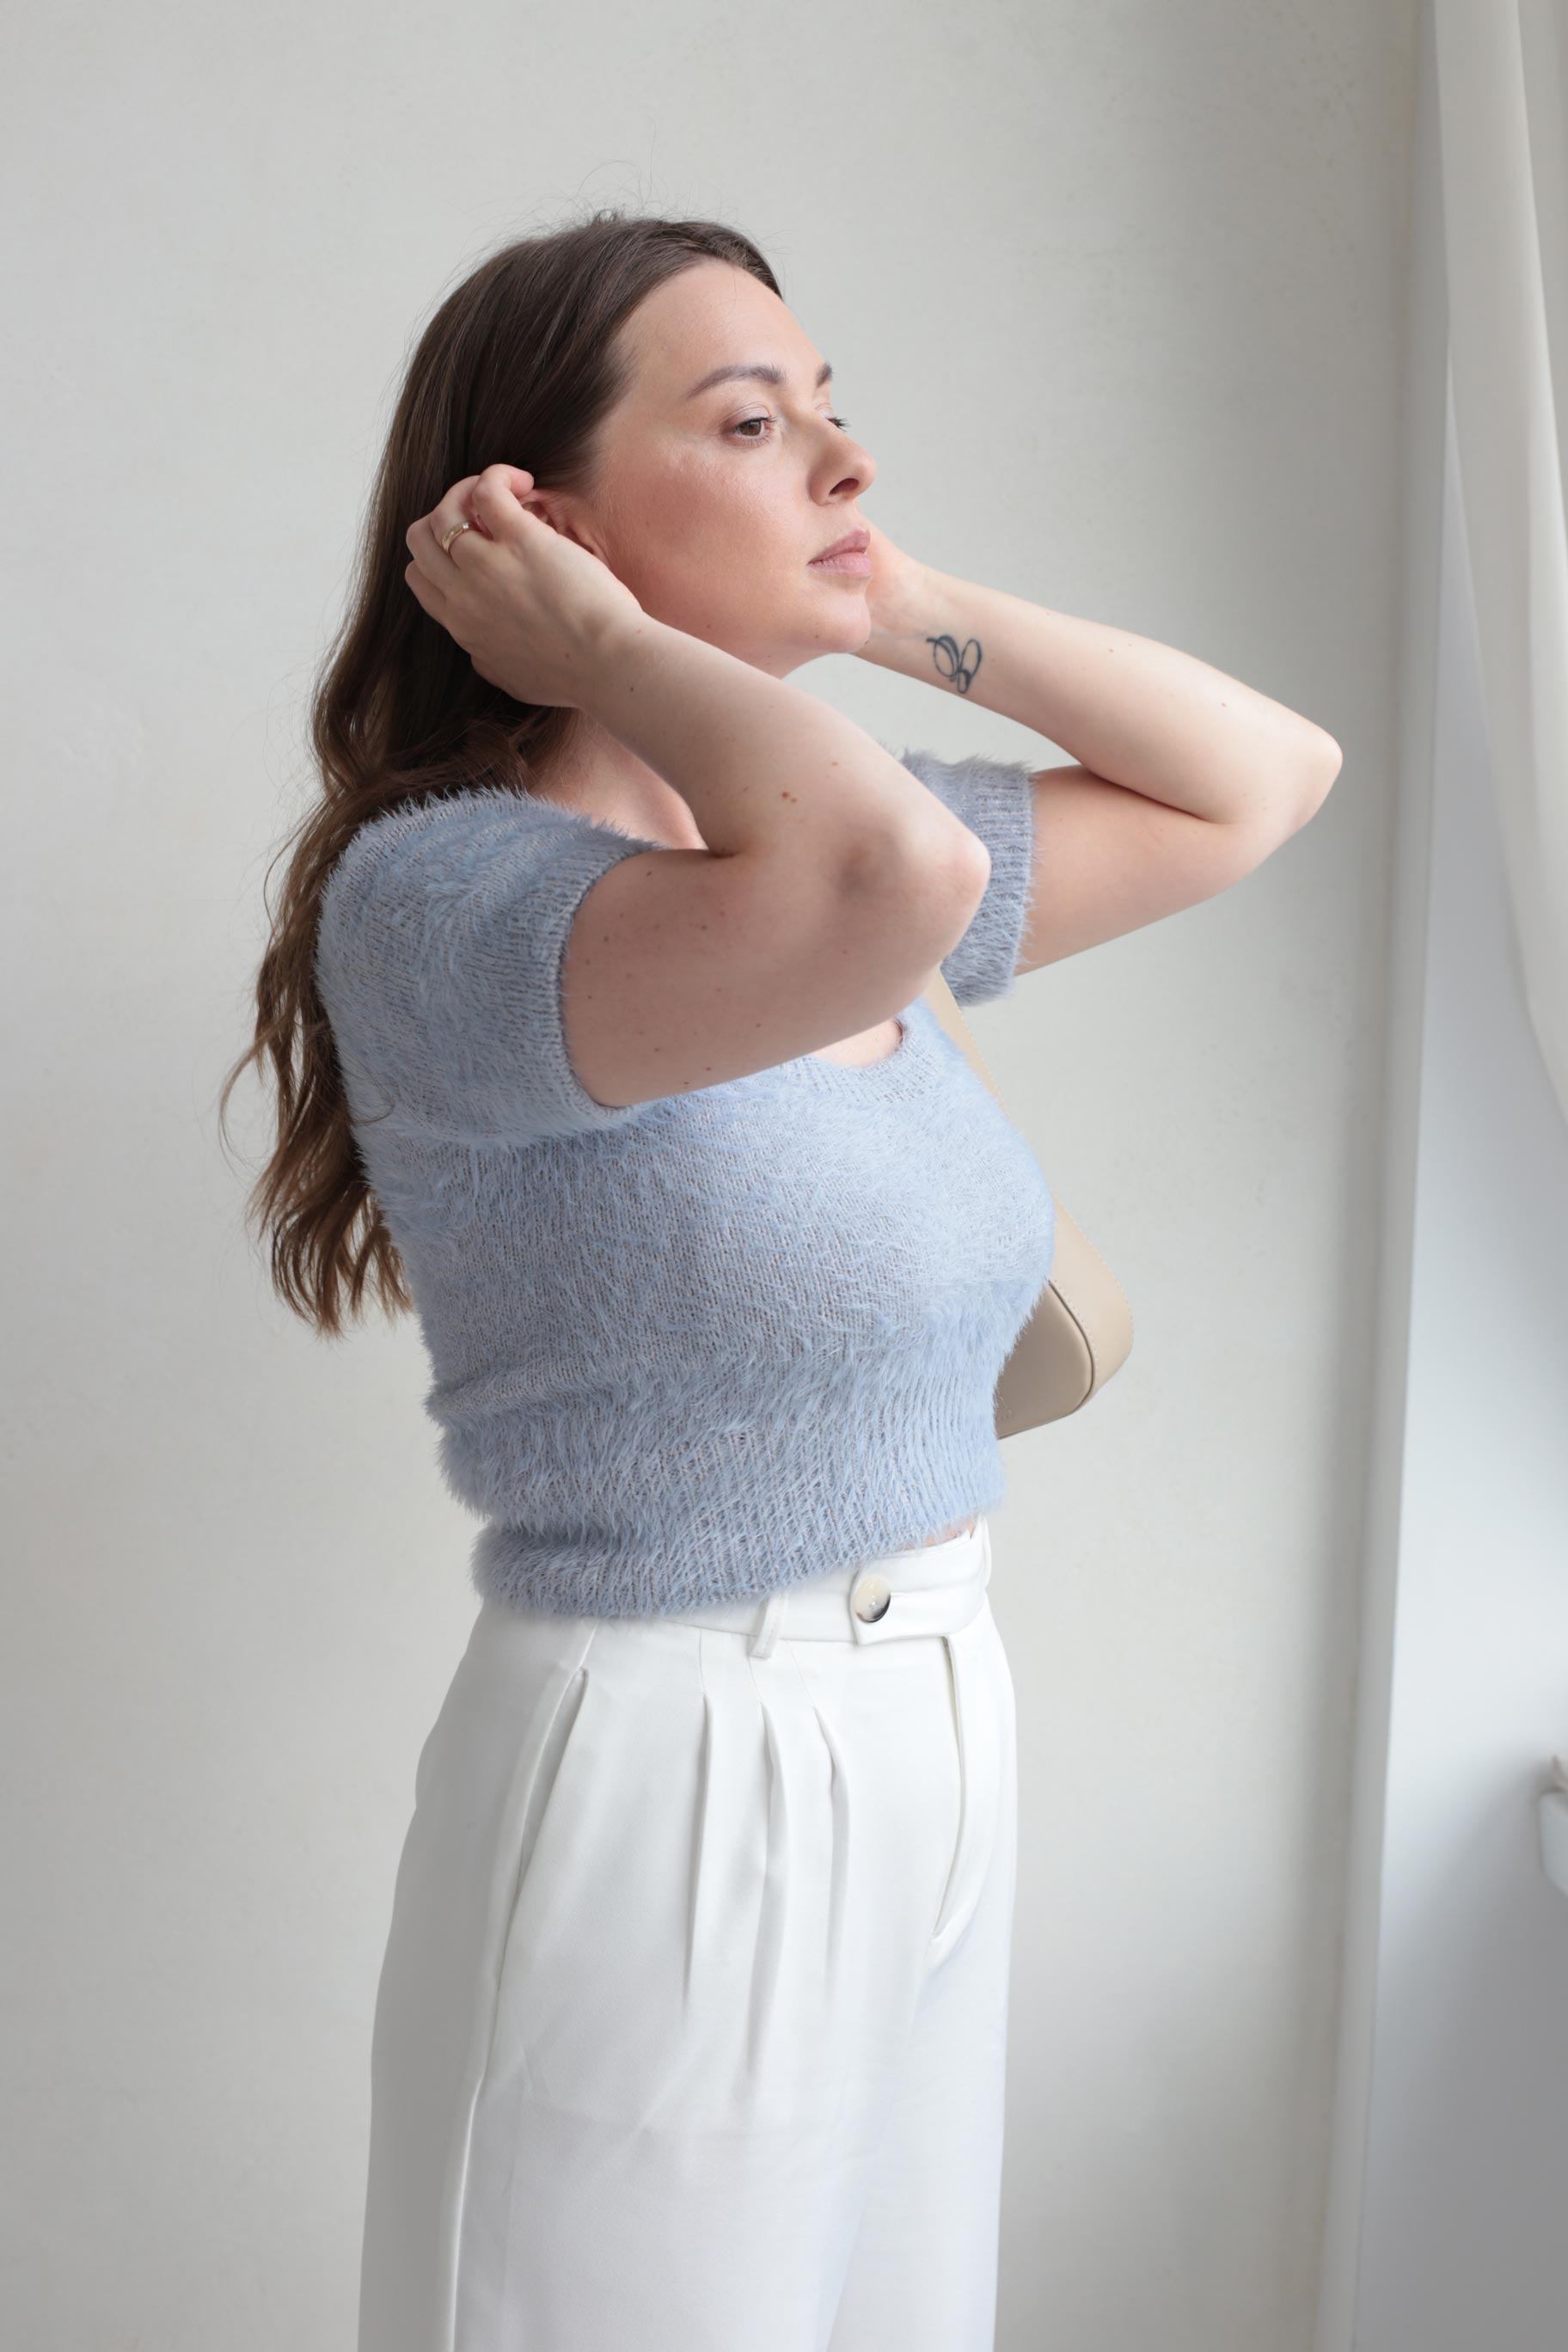 Knit your own fluffy Coy Top Closed using MorecaKnit's pdf pattern